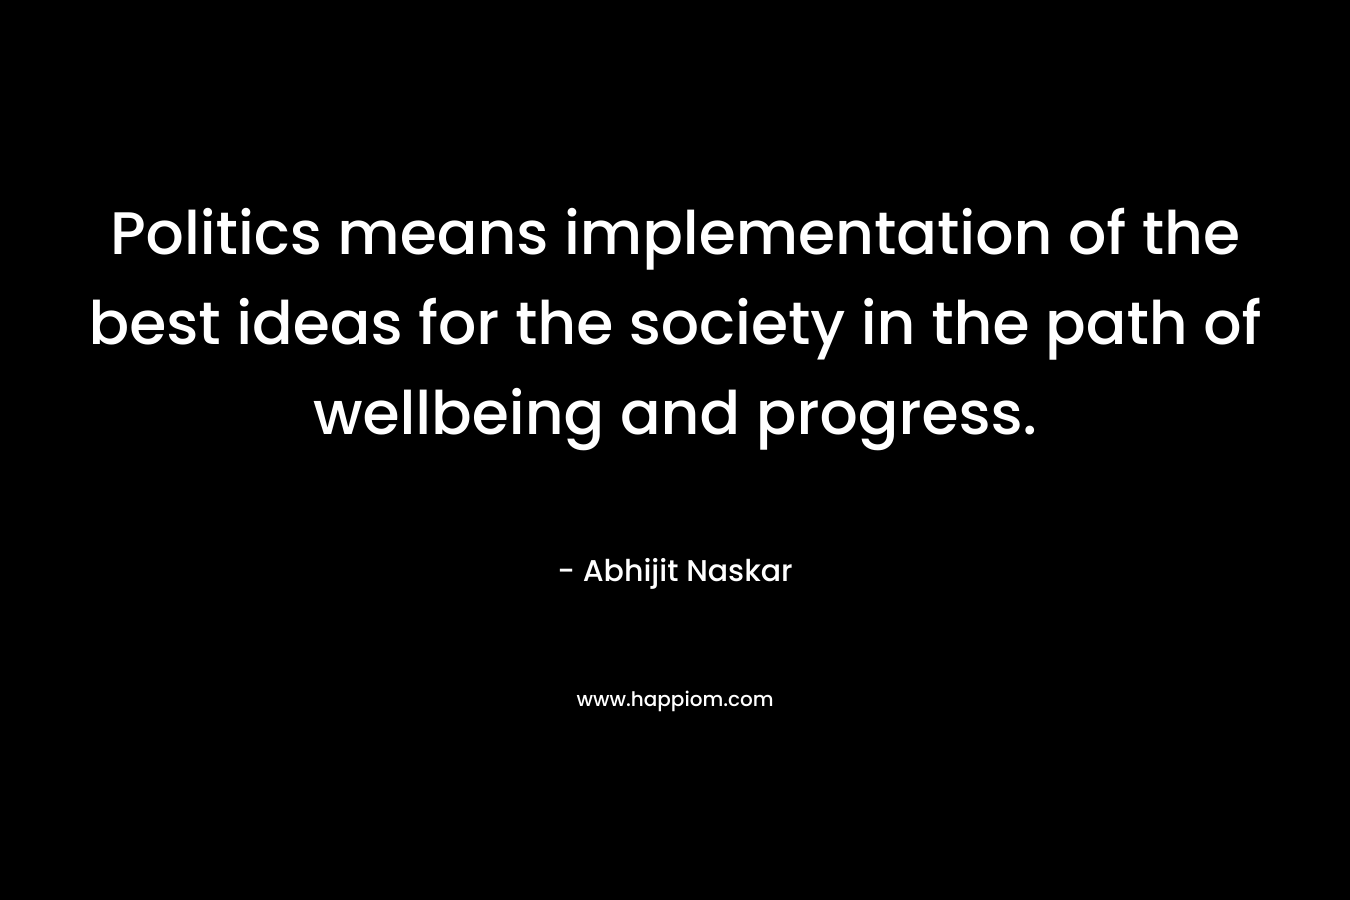 Politics means implementation of the best ideas for the society in the path of wellbeing and progress.